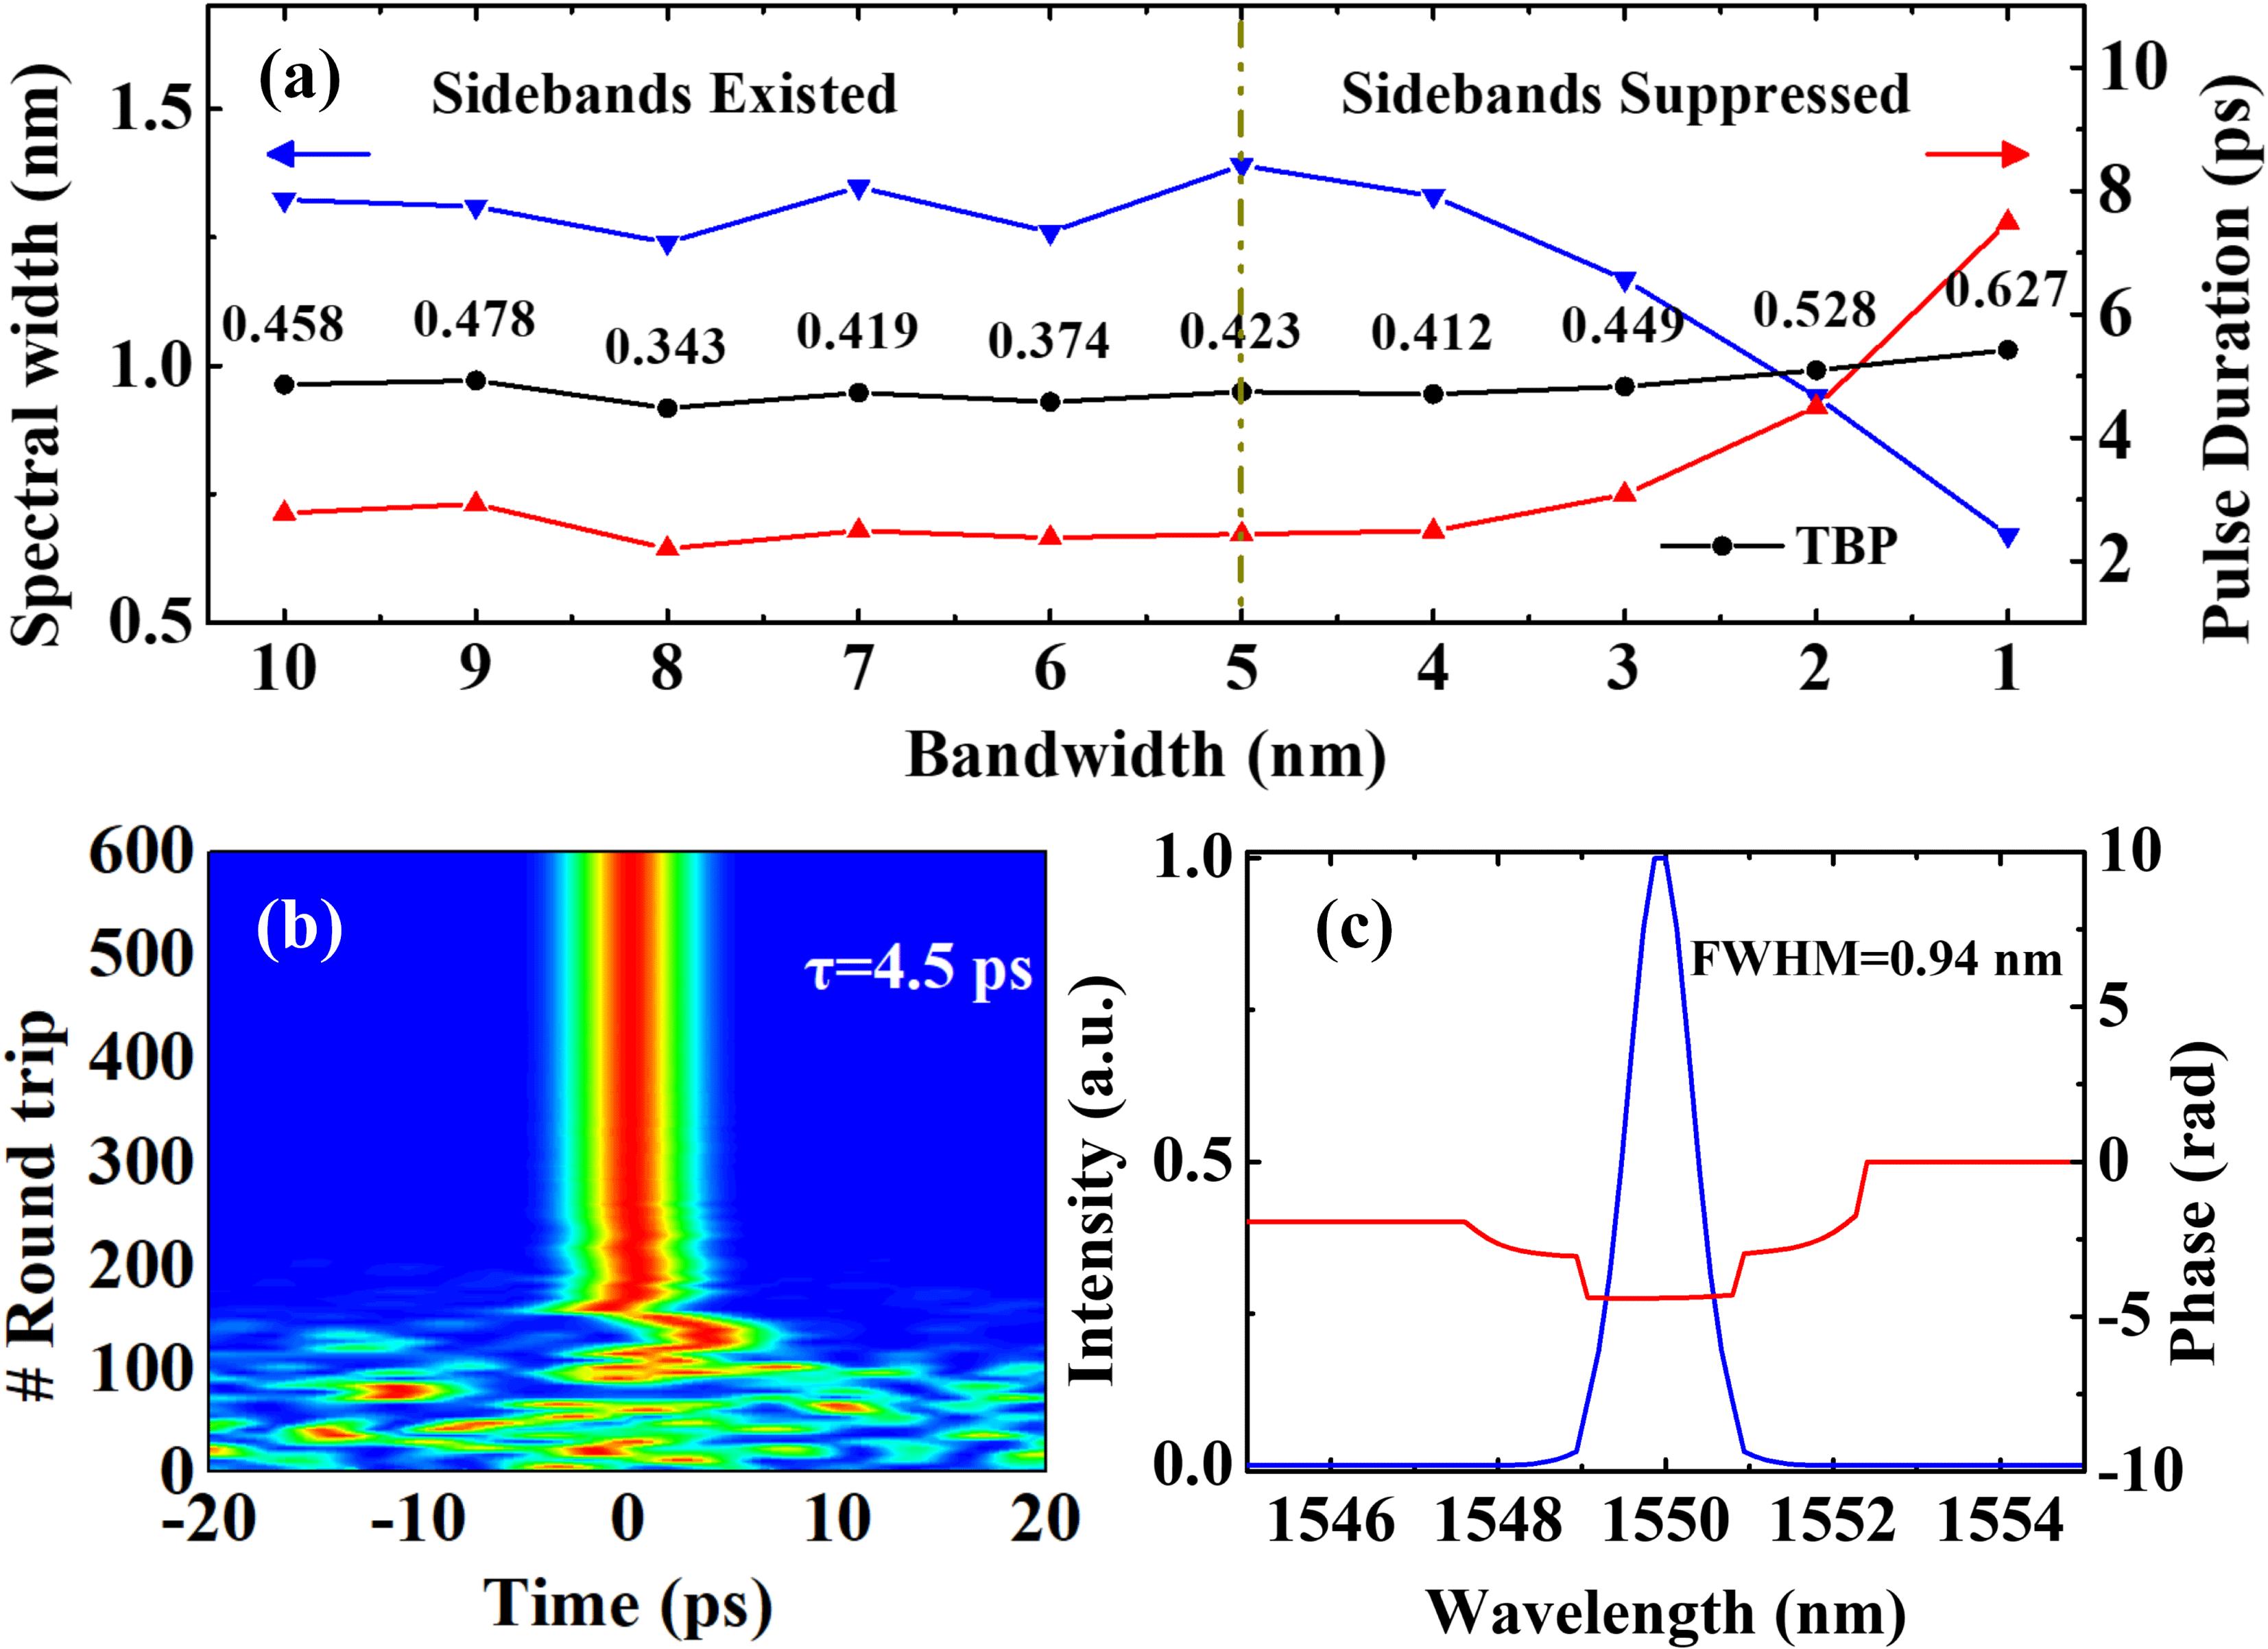 Results of numerical simulations with the intracavity bandpass filter. (a) Characteristics of the output pulses versus the bandwidth of the incorporated bandpass filter. (b) Evolution of the output pulses and (c) steady output spectrum and phase of the simulated oscillator with a 2-nm bandpass filter.